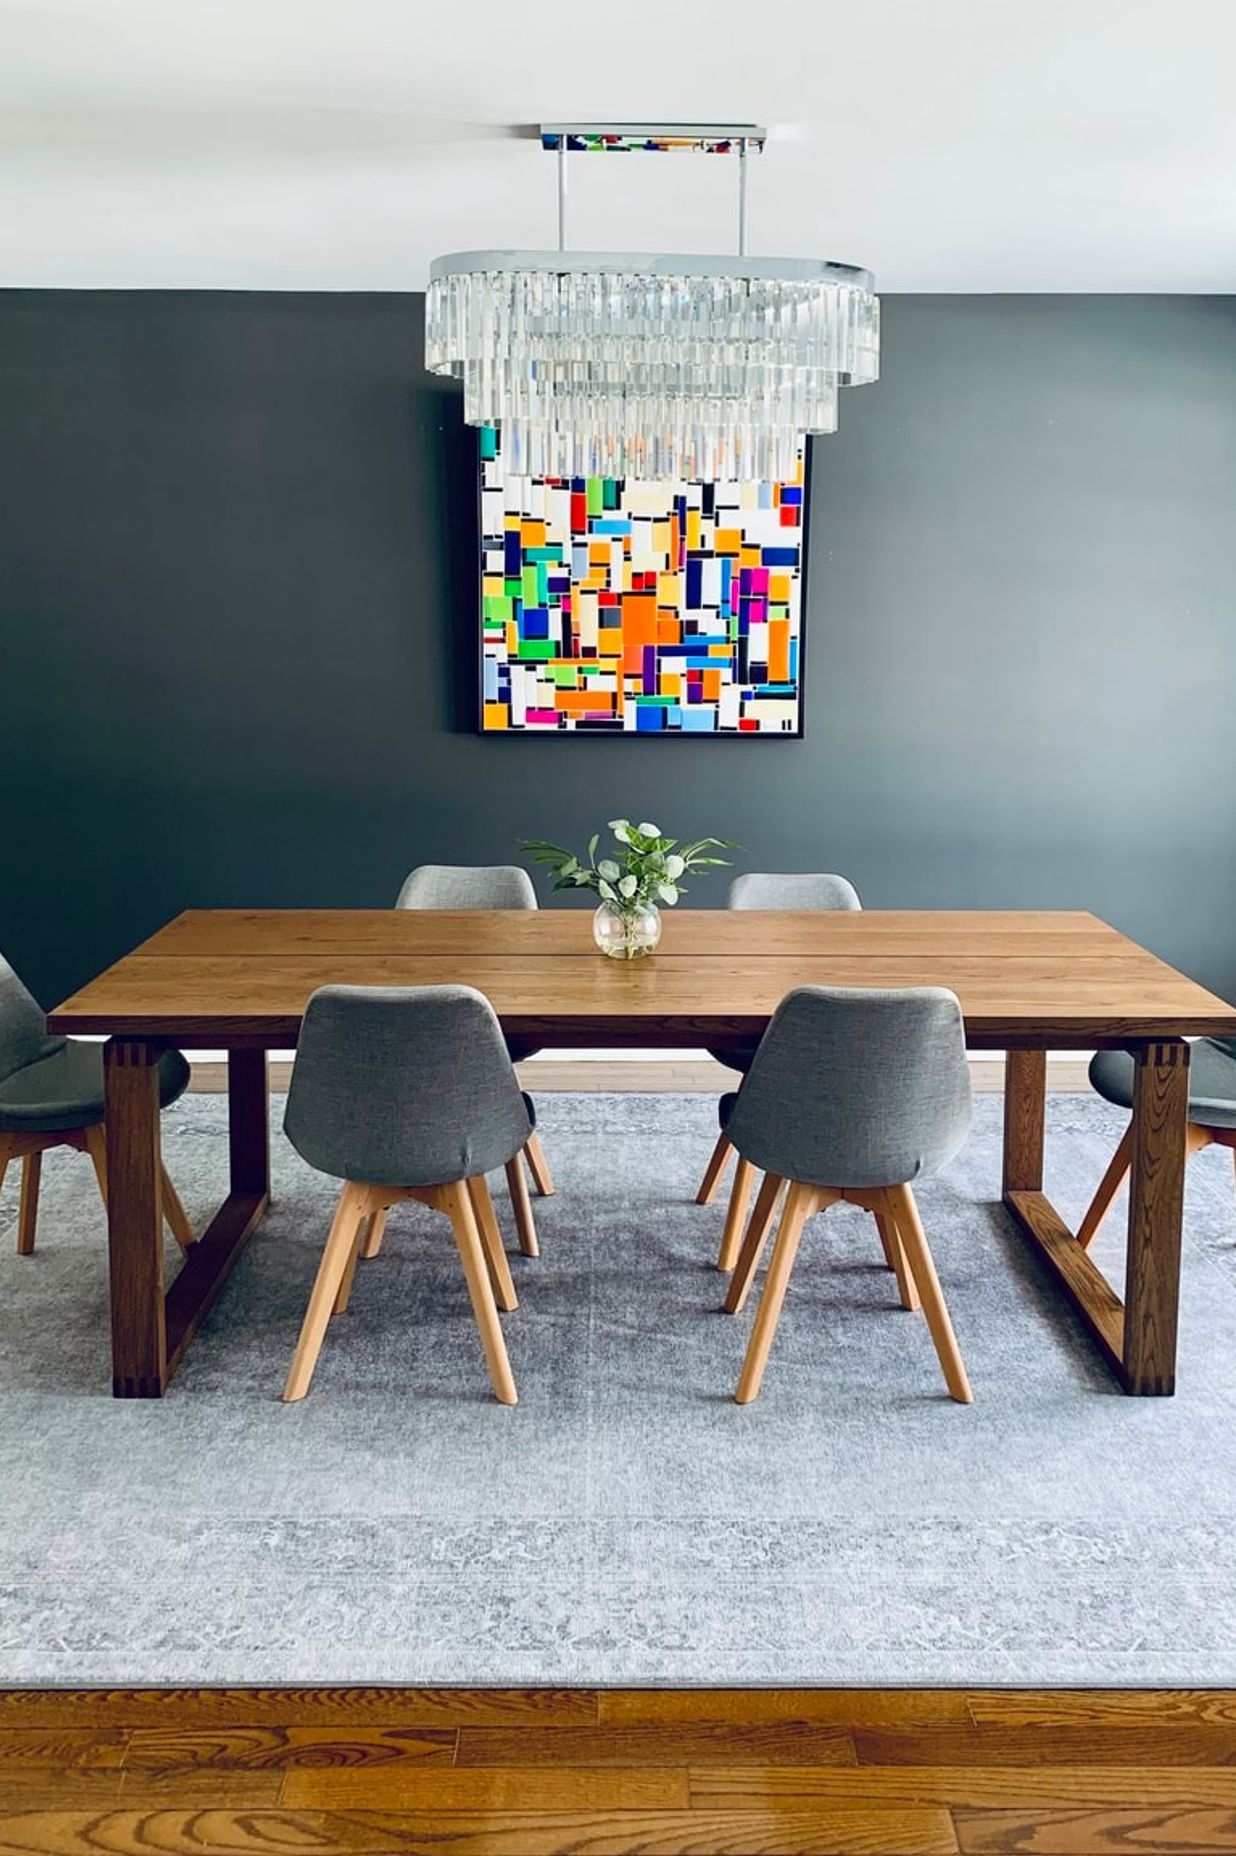 Example of seating in dining area | Photo Credit - Unsplash